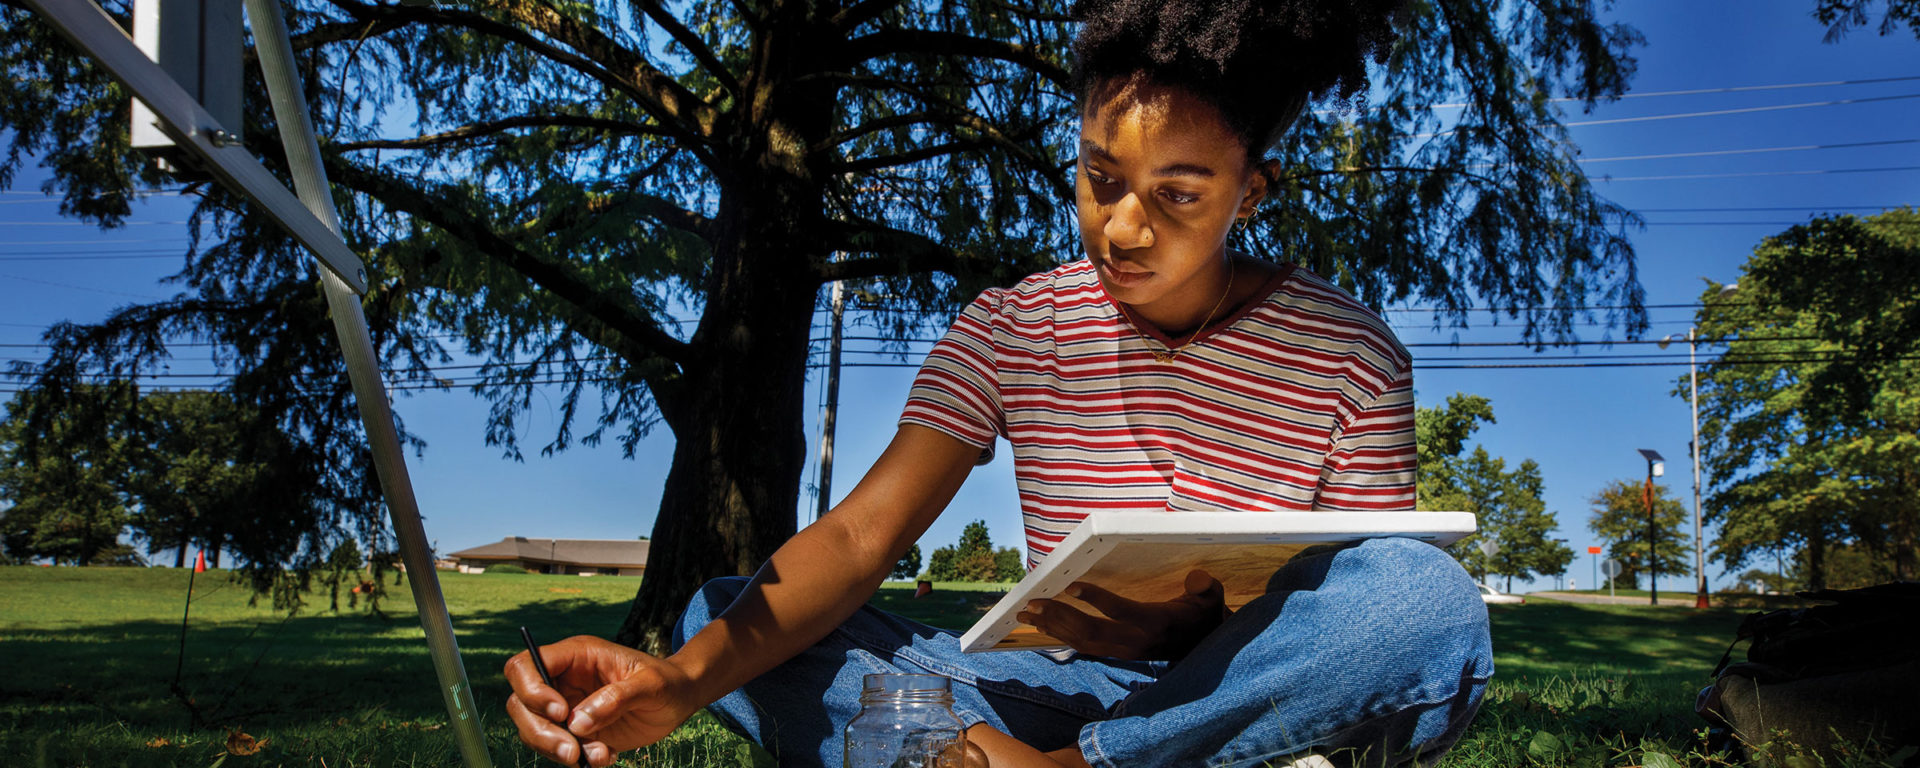 A Black woman sits under a tree and paints on a canvas in an outdoor art class